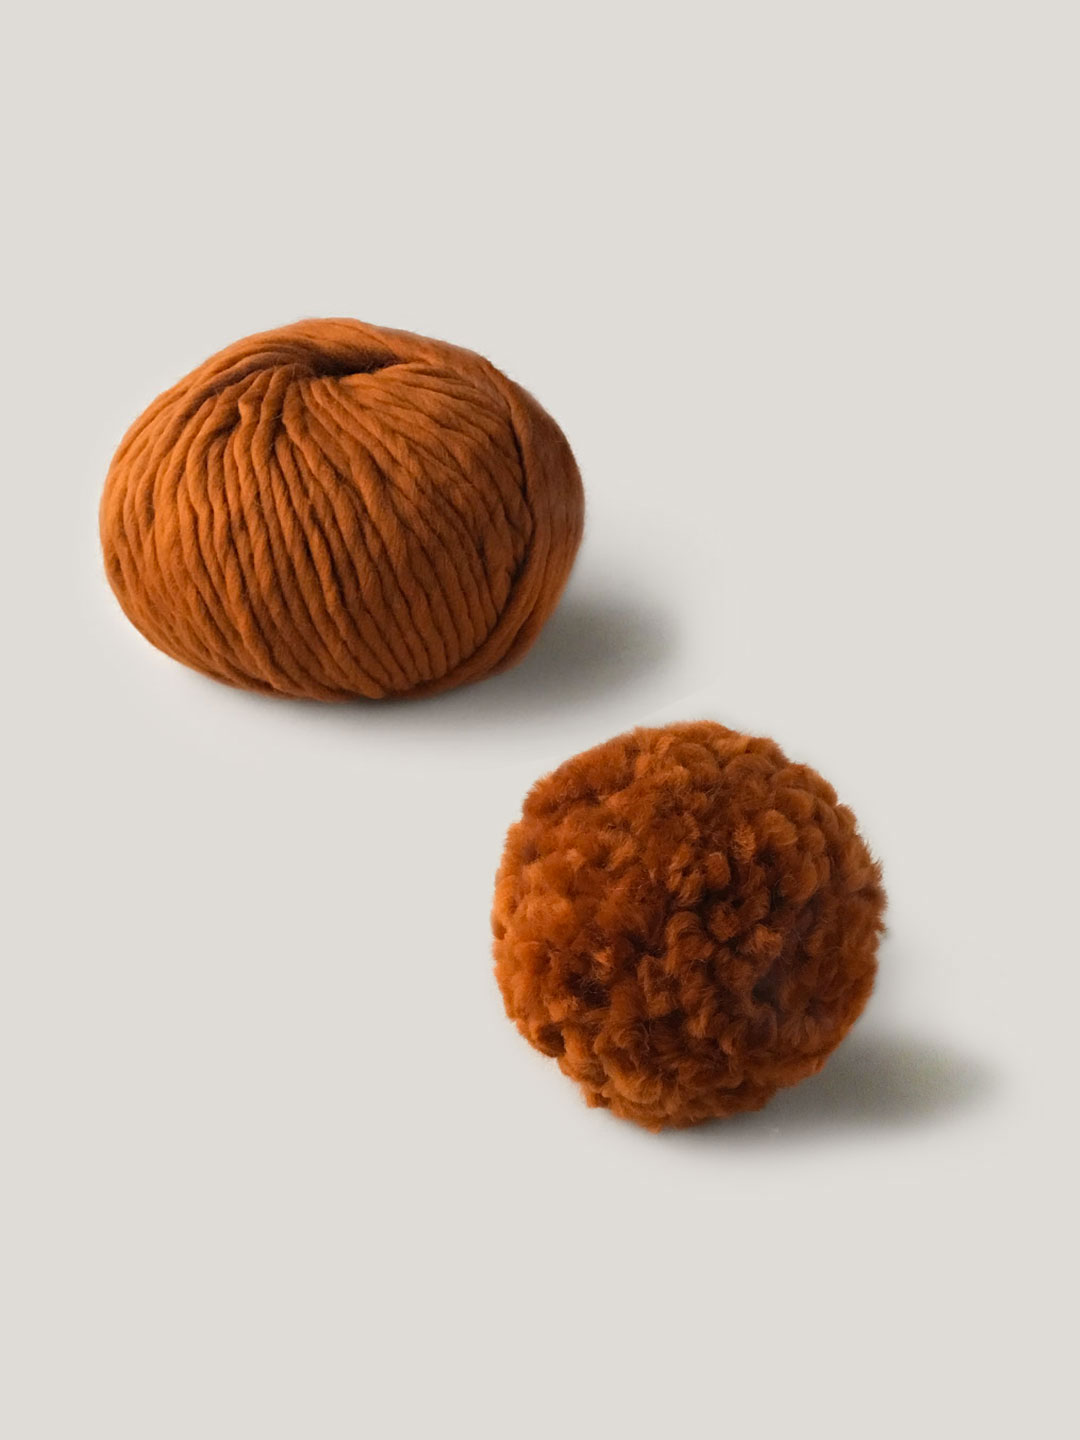 Wool and the Gang Crazy Sexy Wool, EARTHY ORANGE, Super Chunky